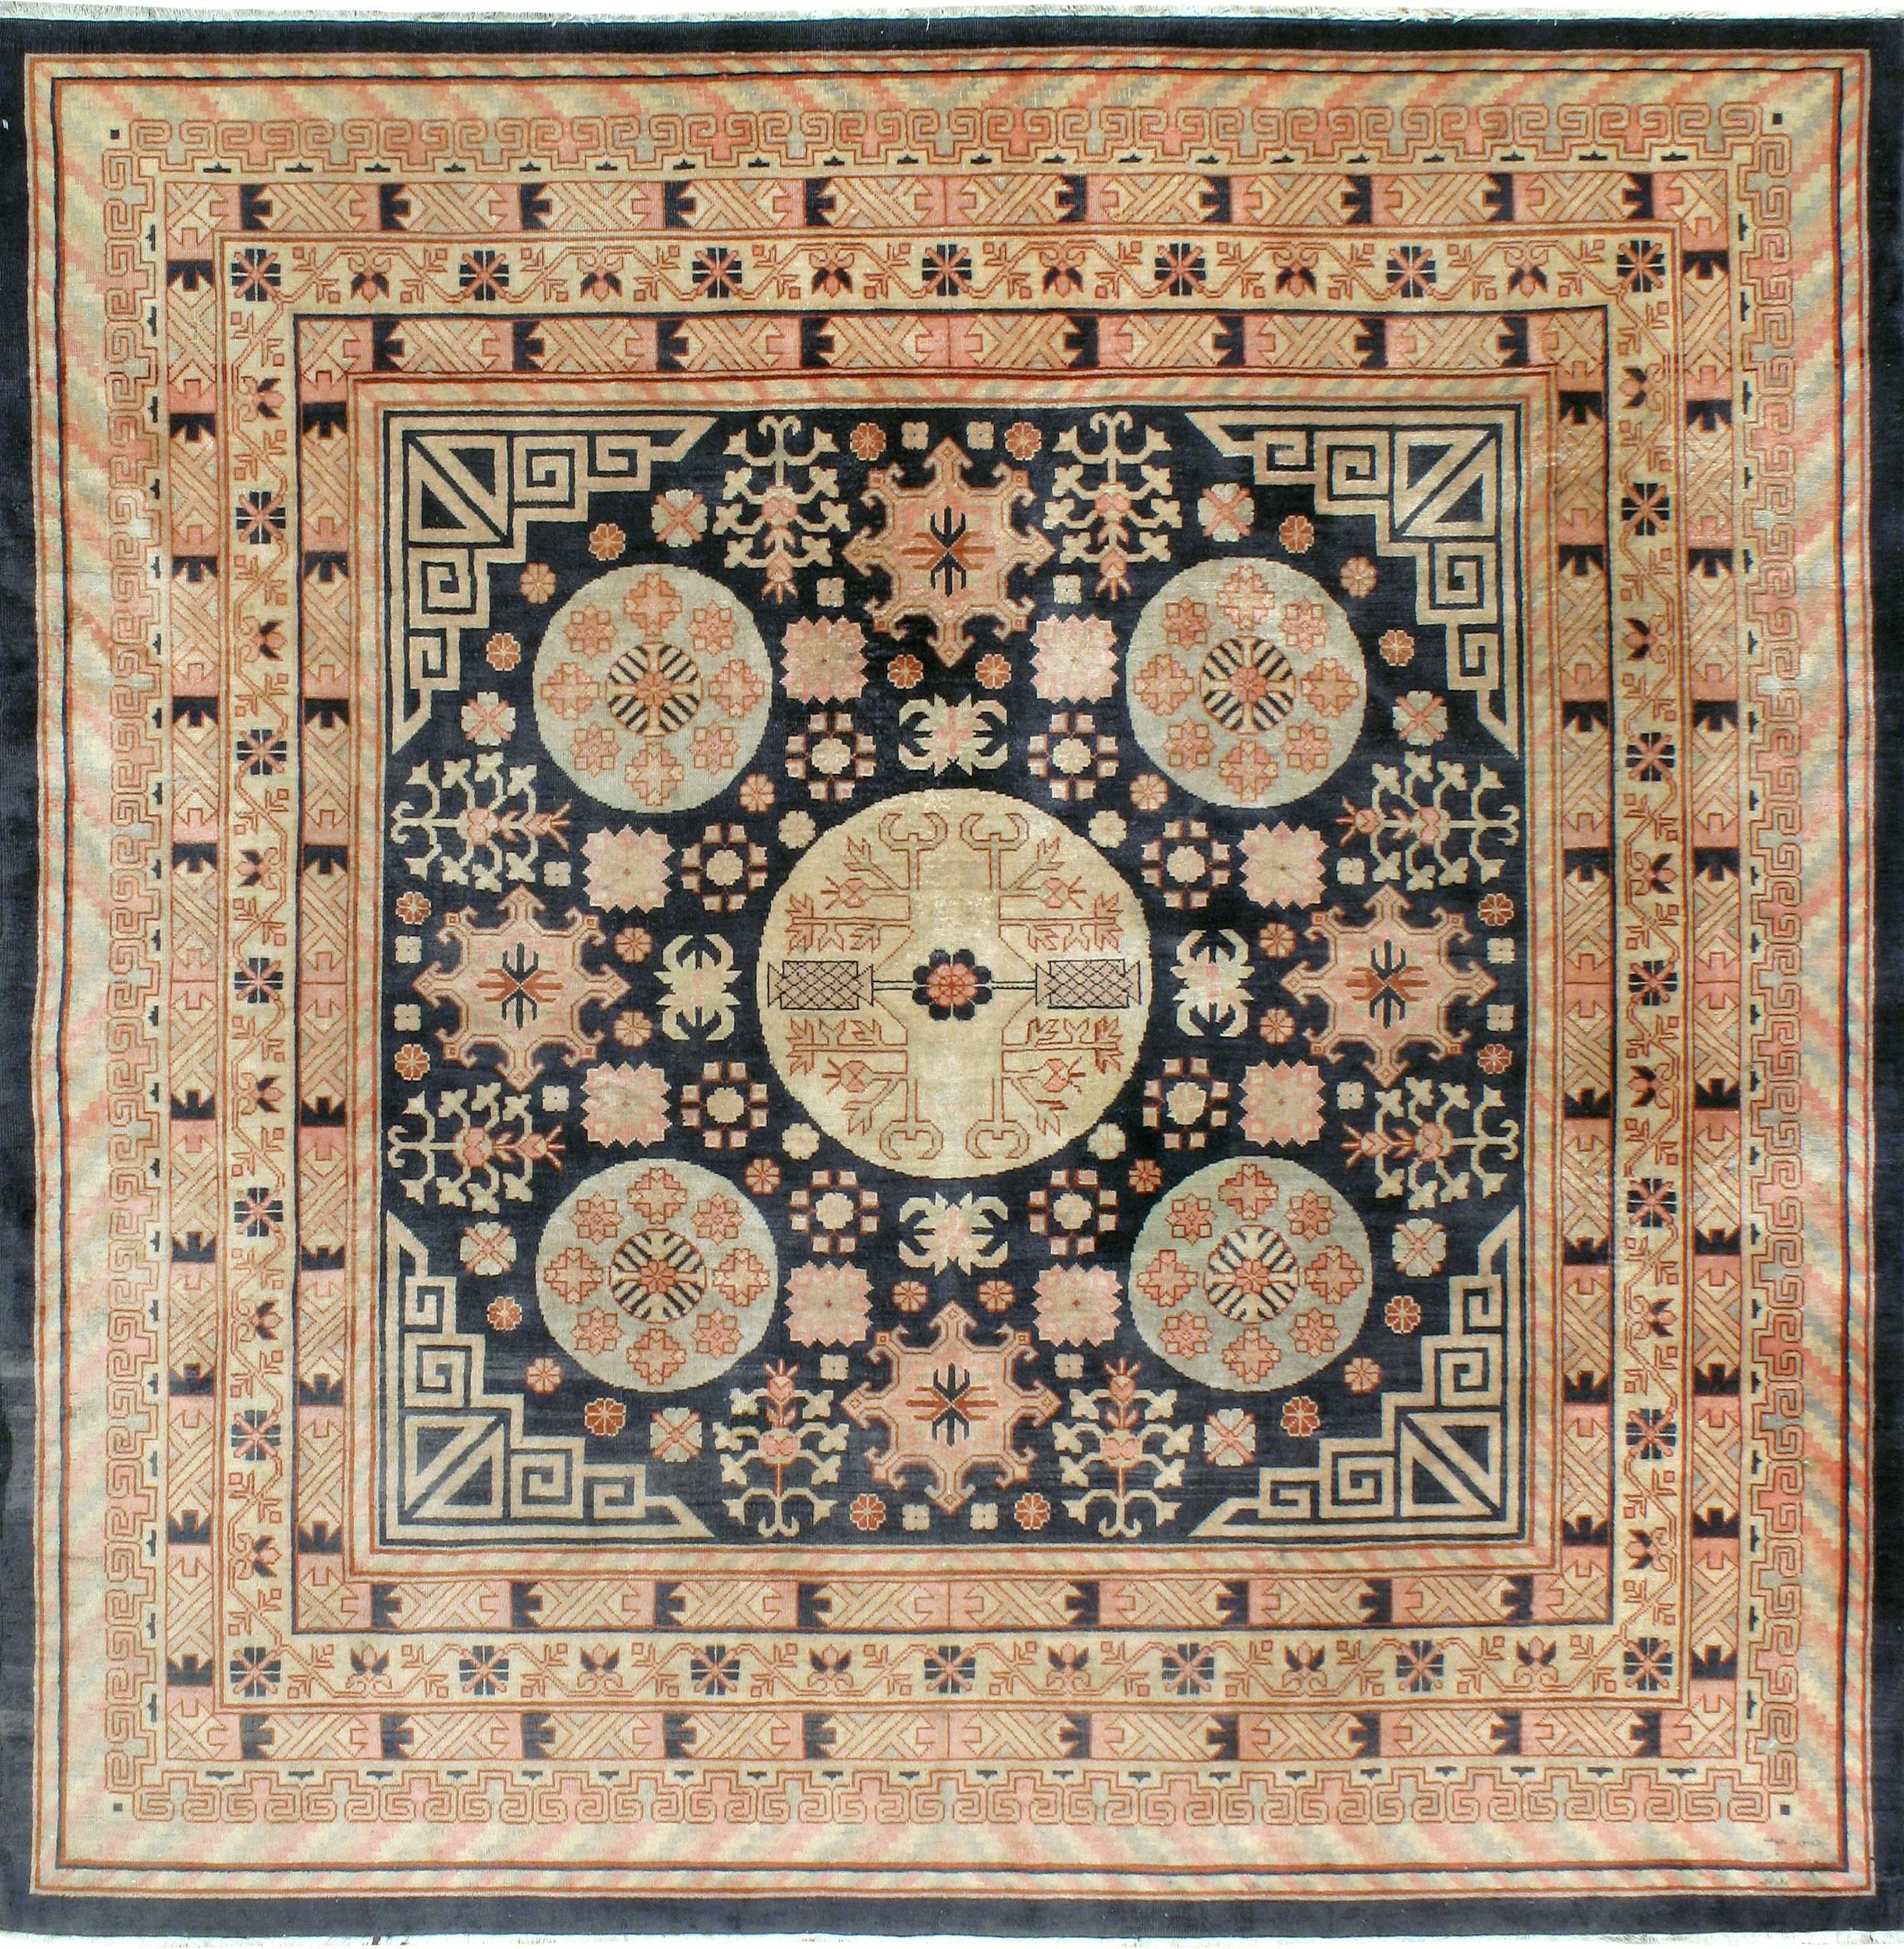 An early 20th century East Turkestan Khotan carpet. Antique Khotan rugs and carpets were produced in the oasis town of Eastern Turkestan, today part of the Xinjiang region in Western China. This area has had a steady production of carpets since the